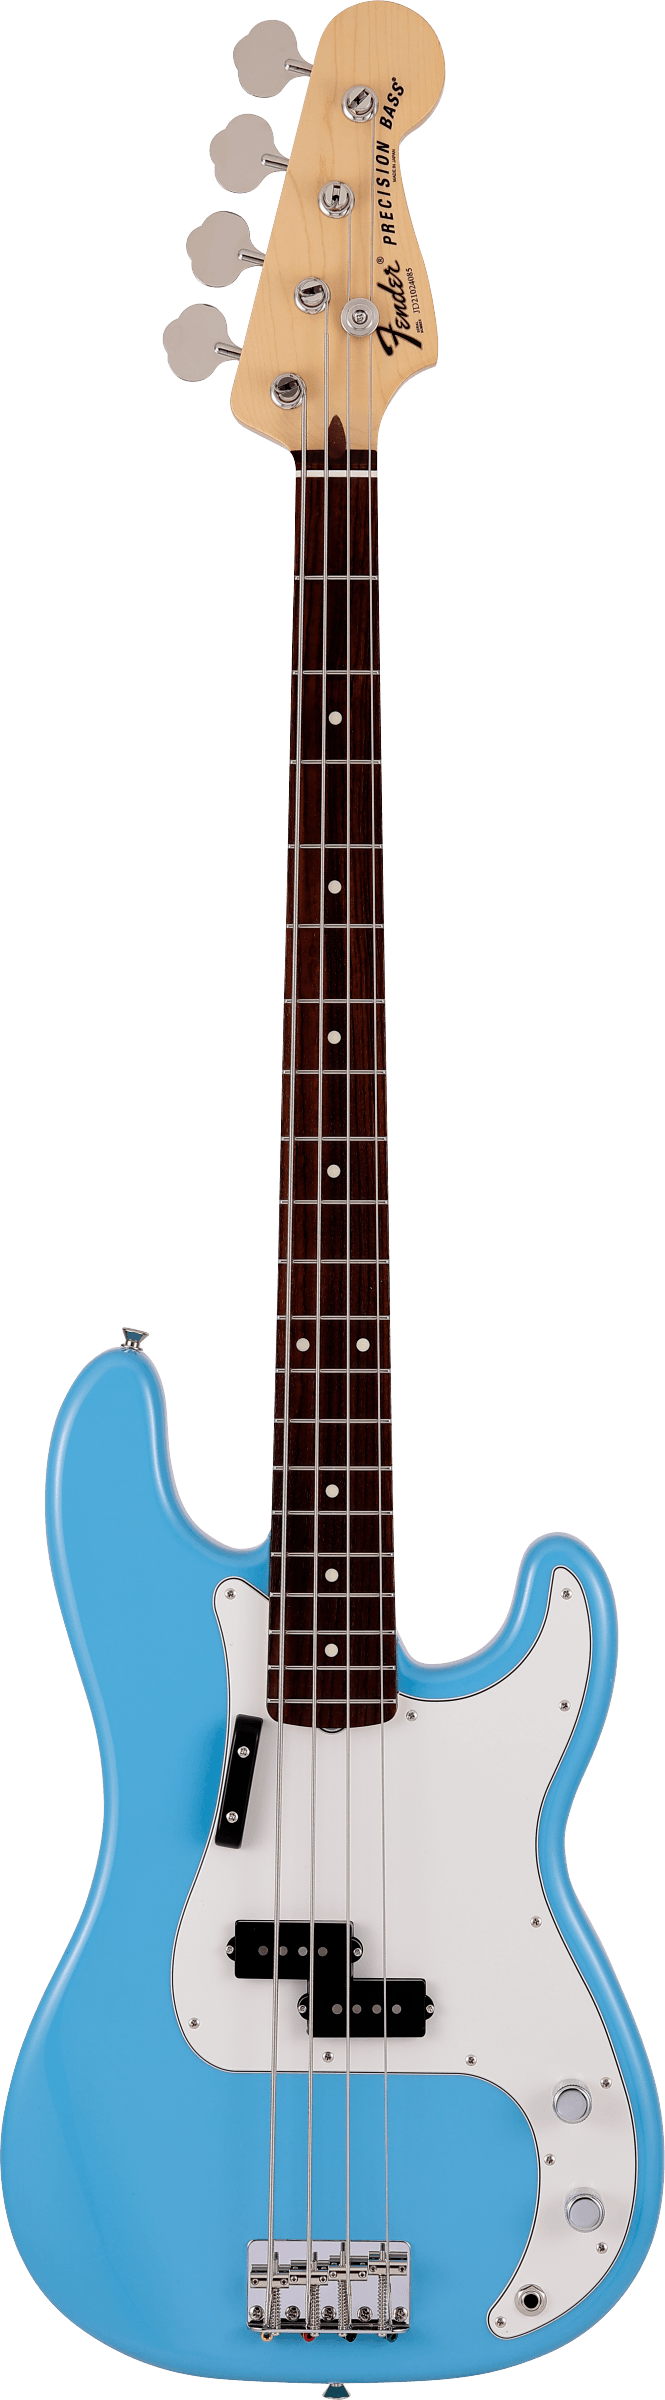 Full frontal of Fender Made in Japan Limited International Color Precision Bass RW Maui Blue.